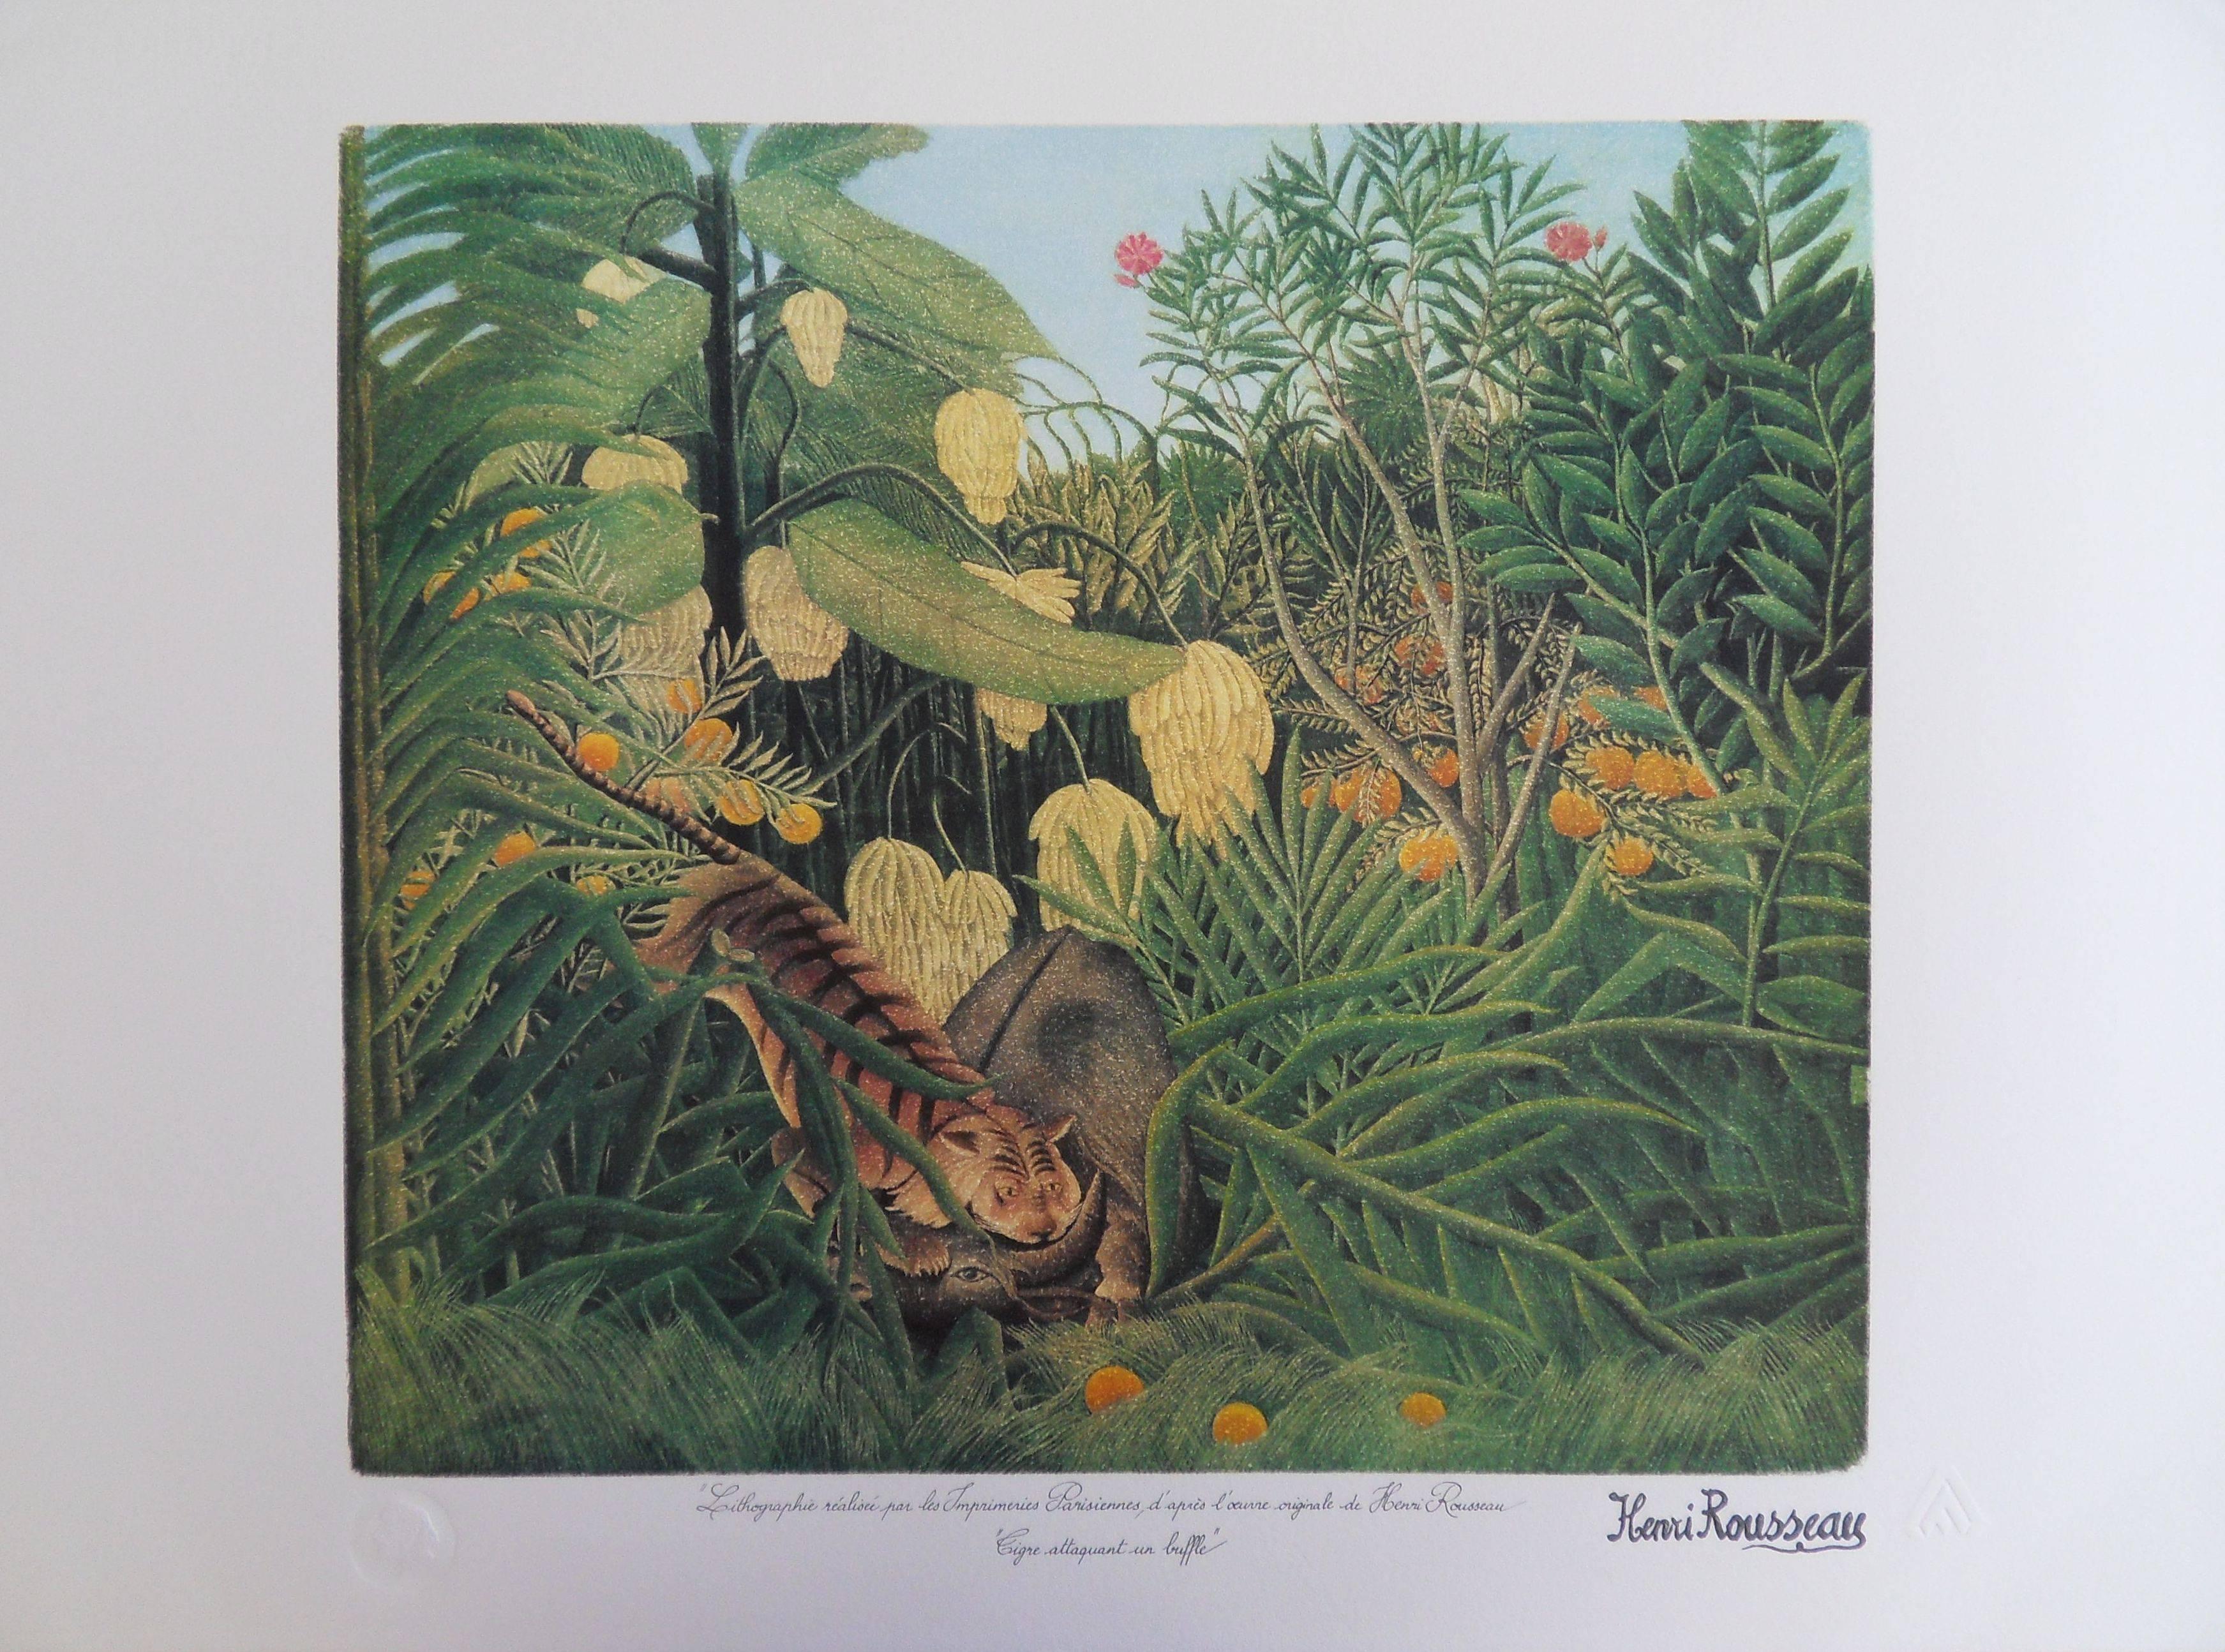 (after) Henri Rousseau Landscape Print - Fight Between a Tiger and a Buffalo - Lithograph - 300ex